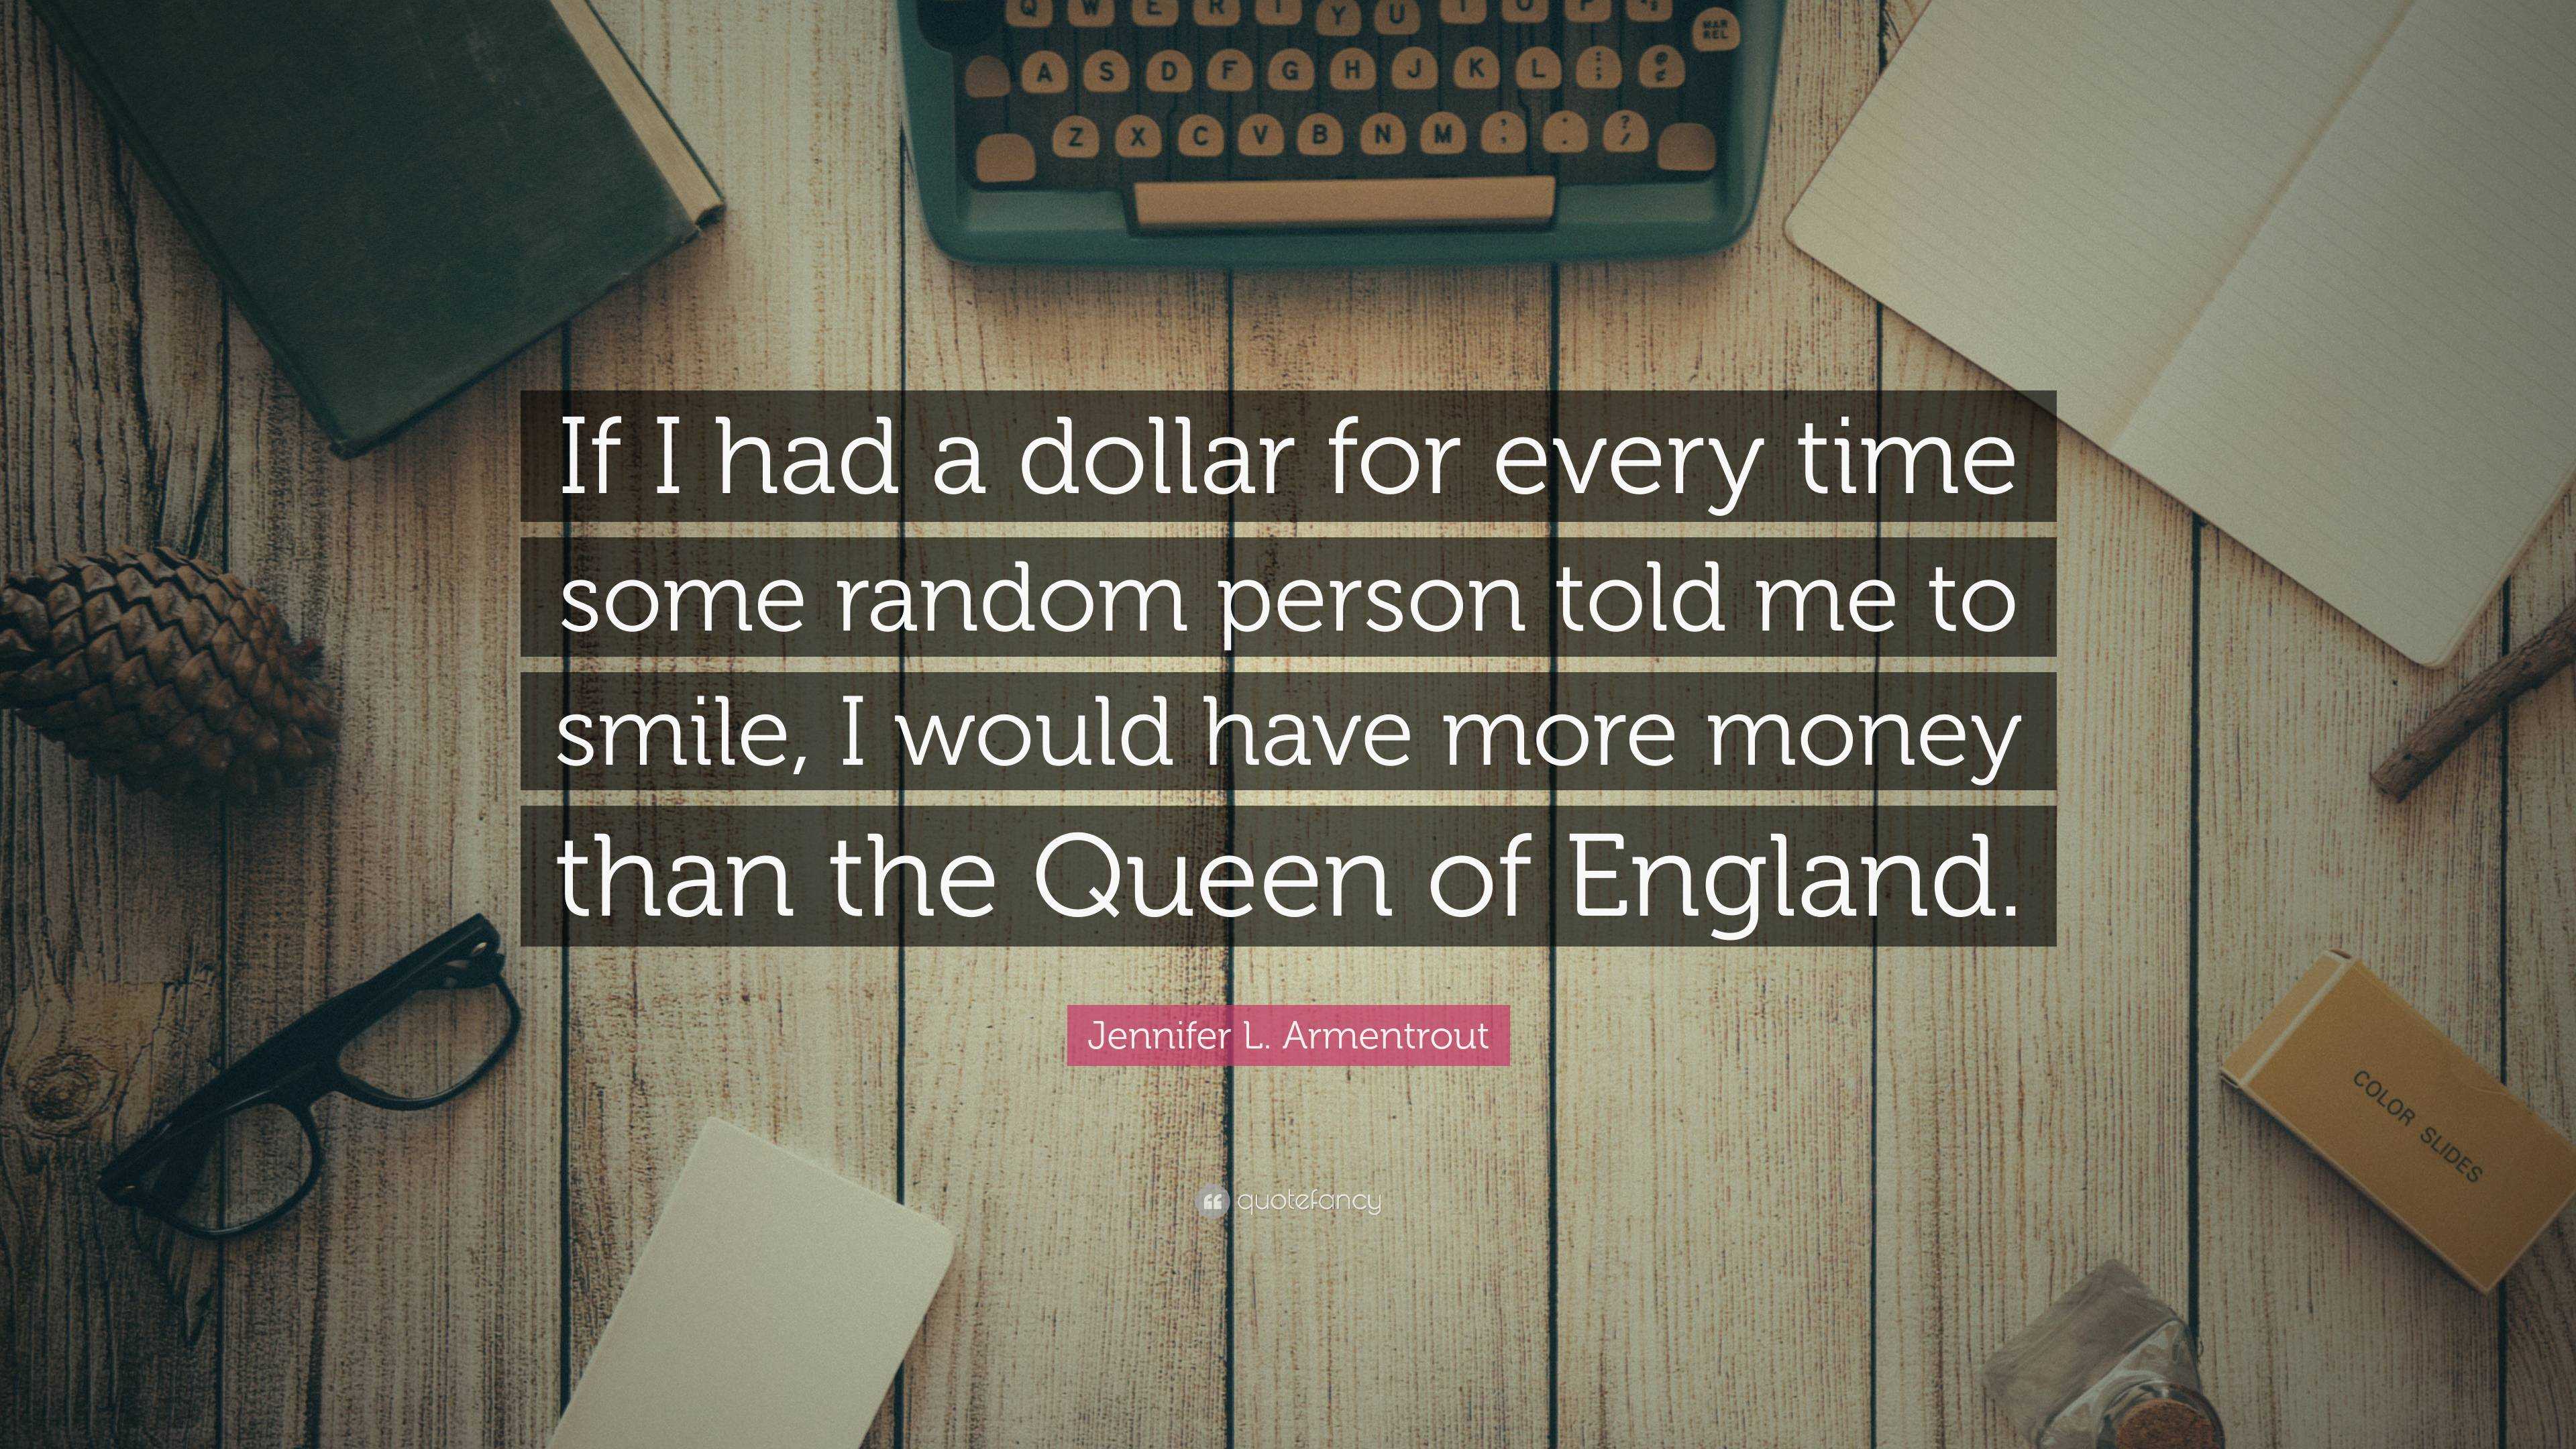 Jennifer L Armentrout Quote “if I Had A Dollar For Every Time Some Random Person Told Me To